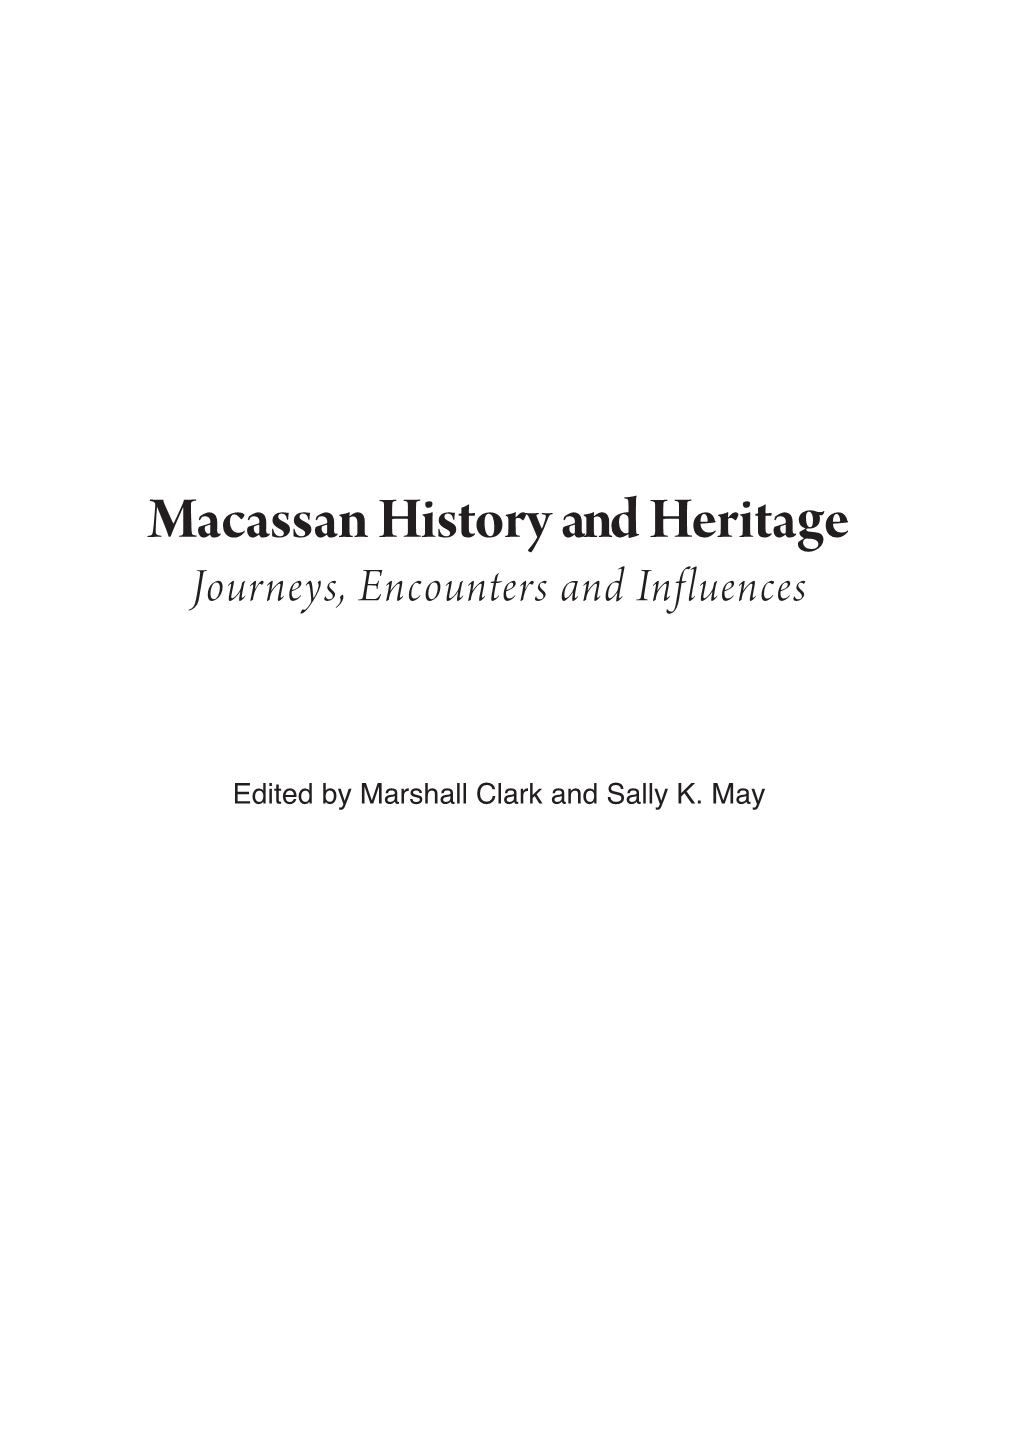 Macassan History and Heritage: Journeys, Encounters and Influences